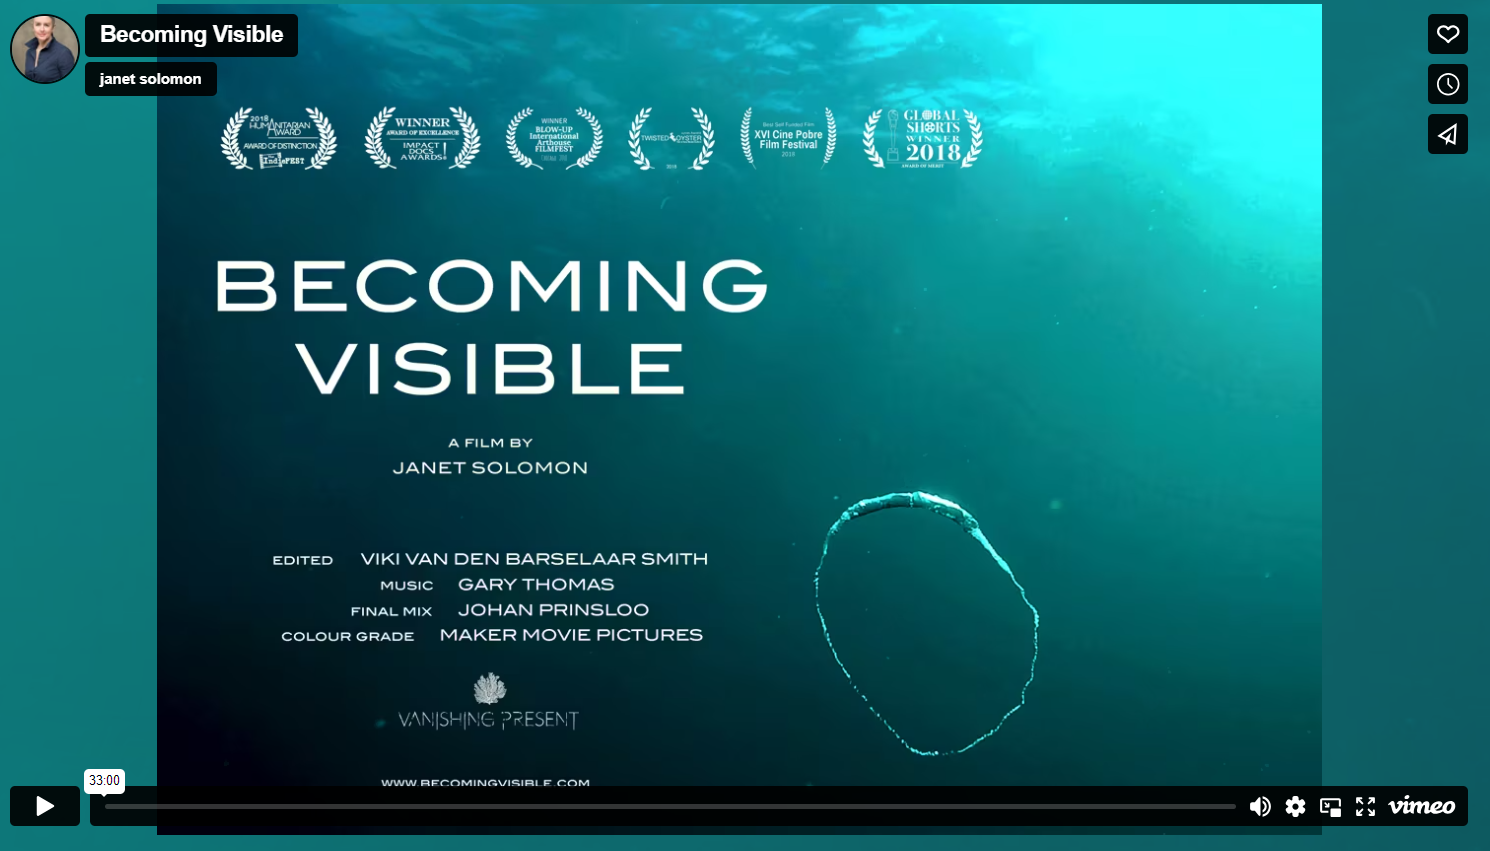 Watch the highly-acclaimed Janet Solomon movie - Becoming Visible - right here